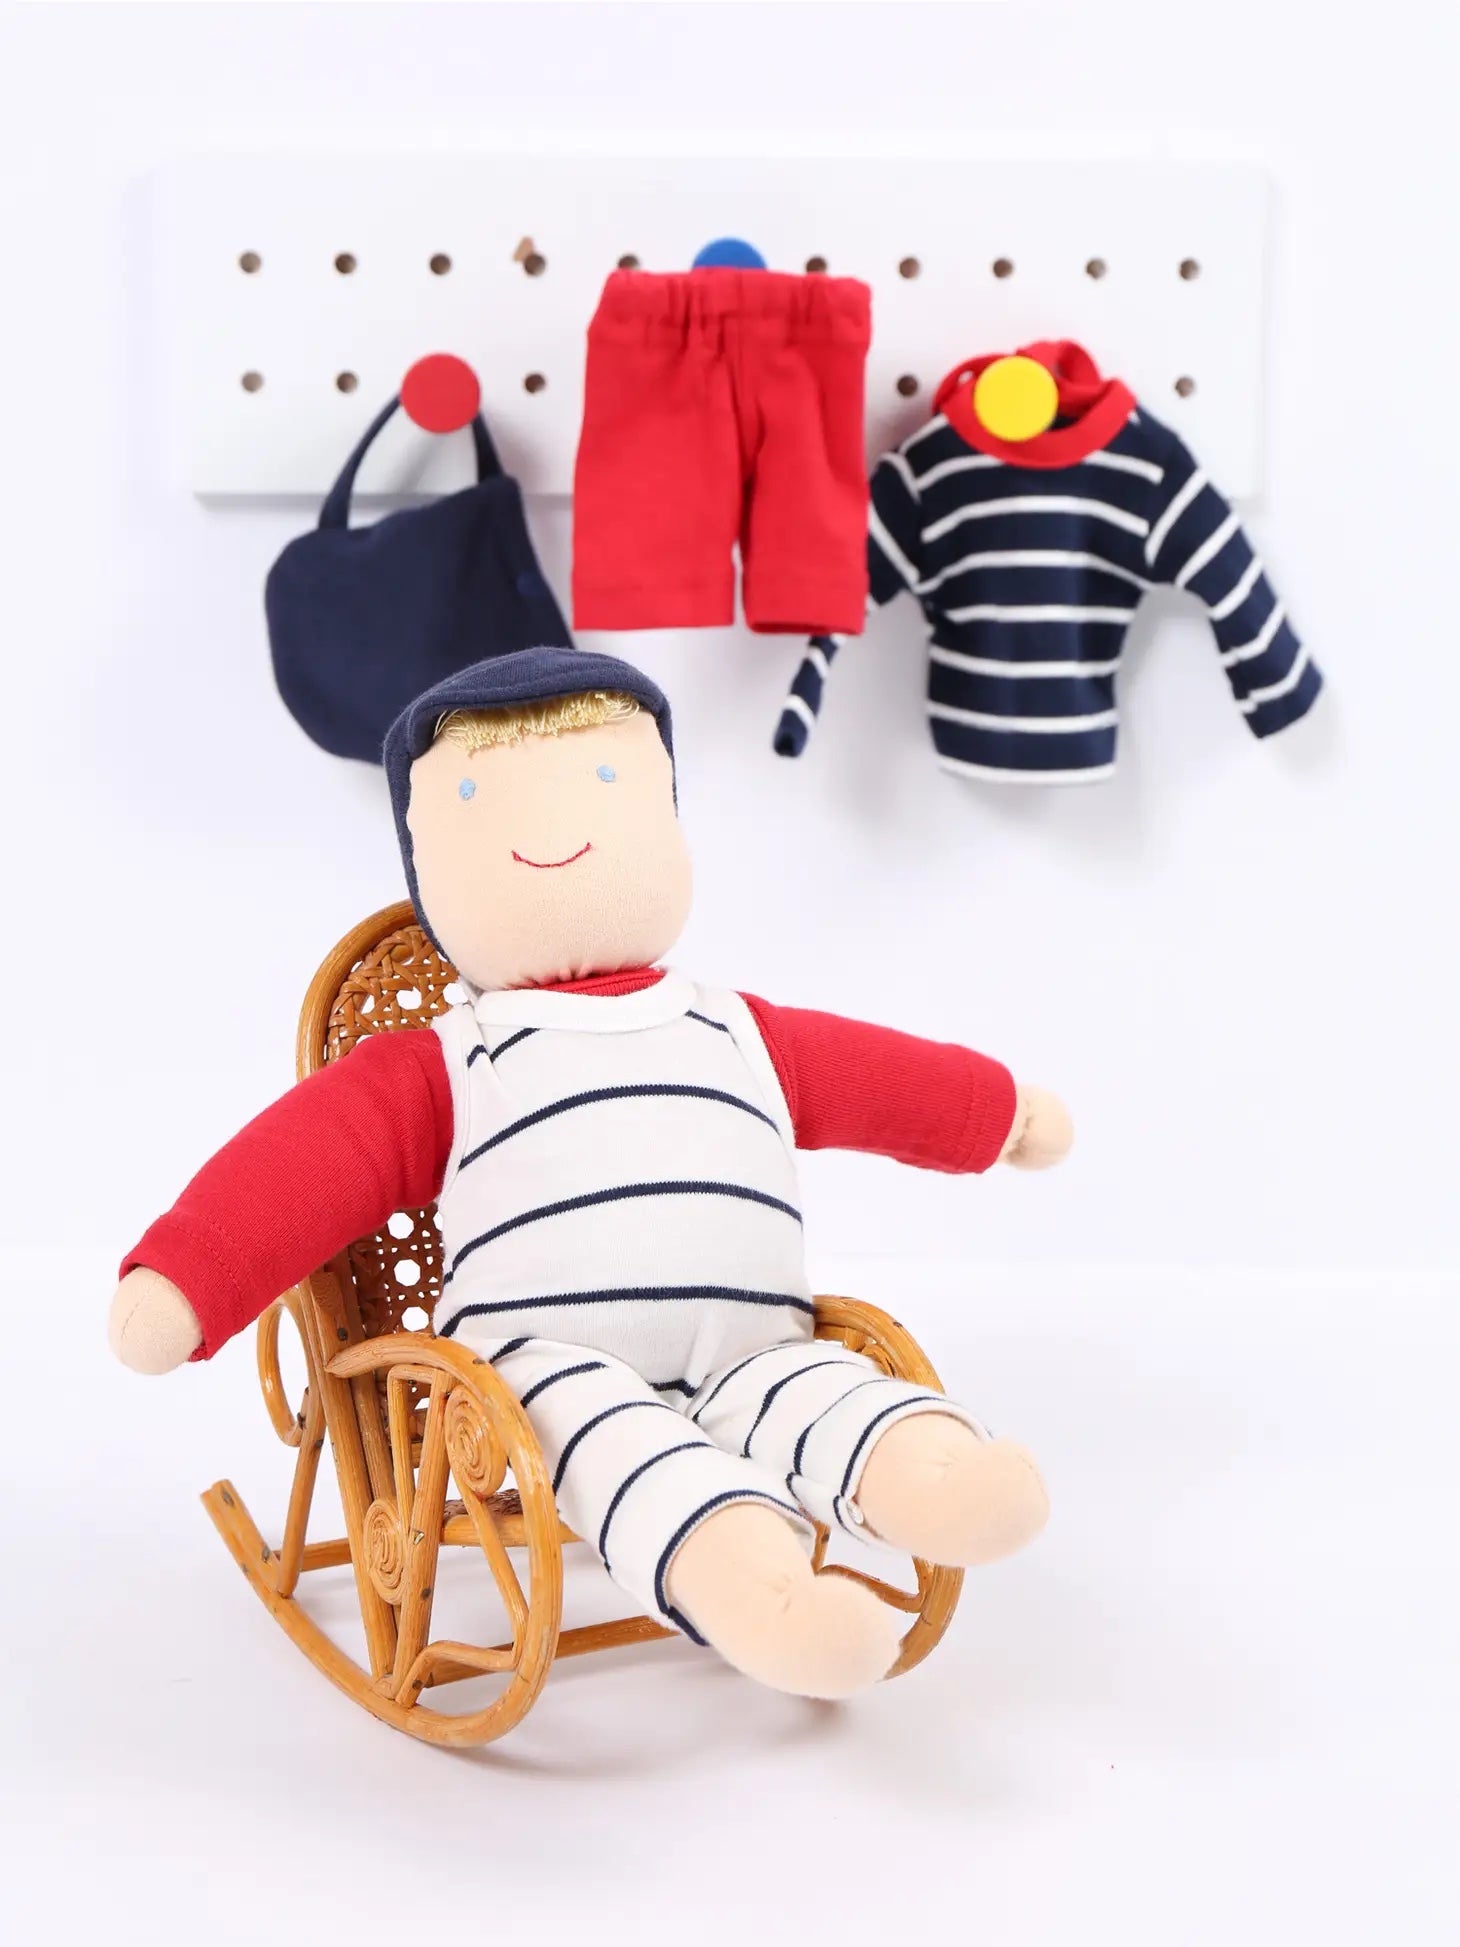 Henry waldorf dress up doll with clothes